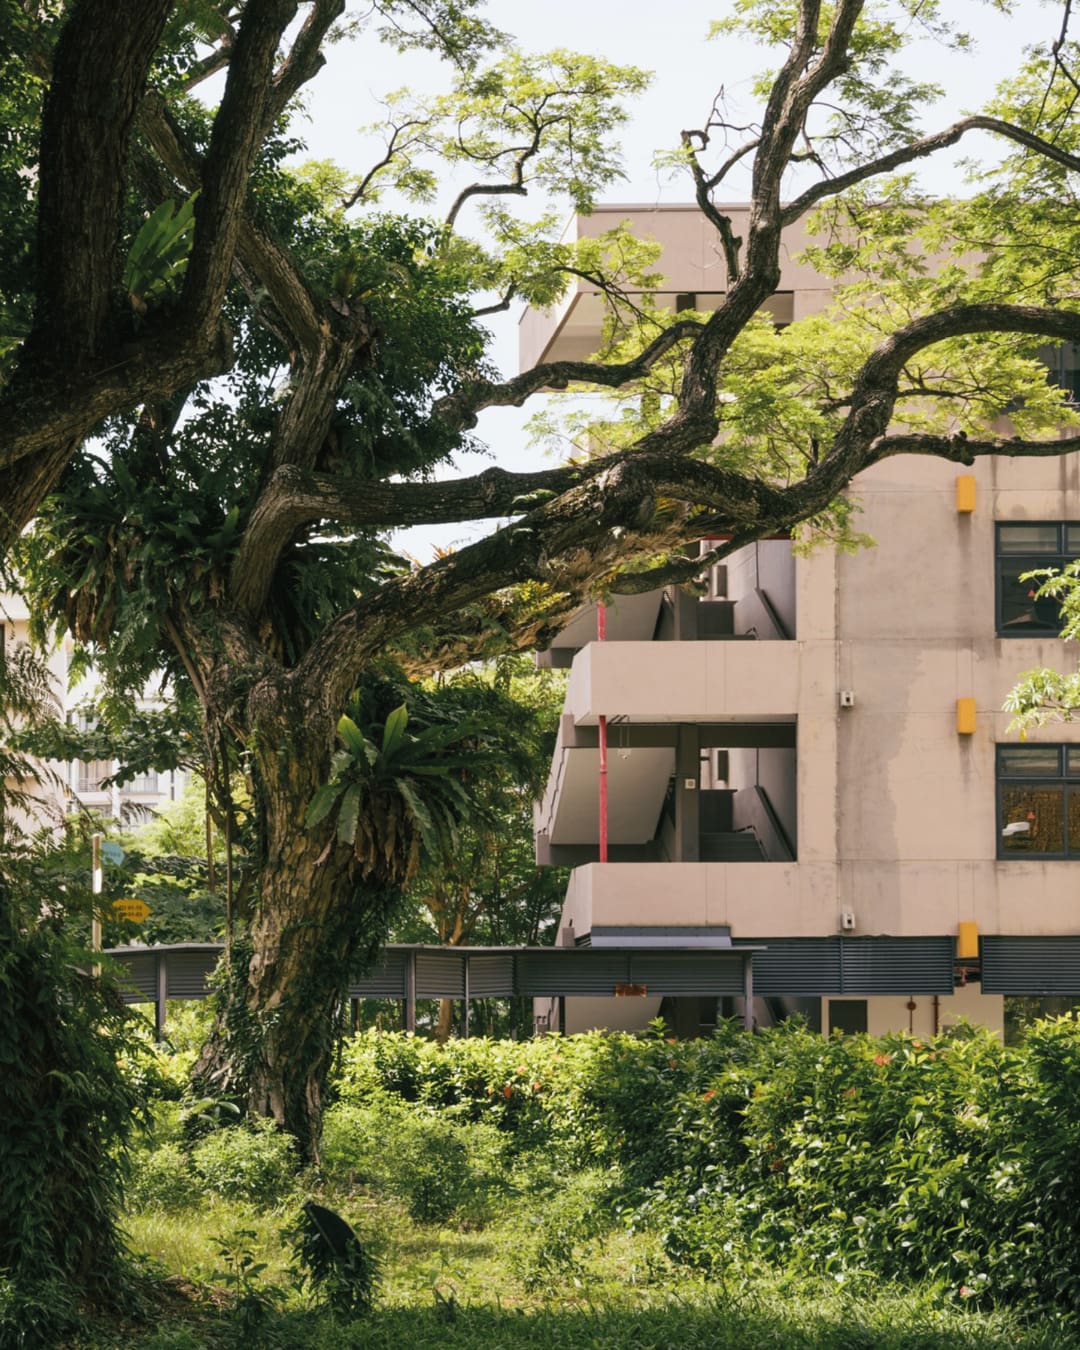 A brutalist building contrasted with verdant greenery in Singapore